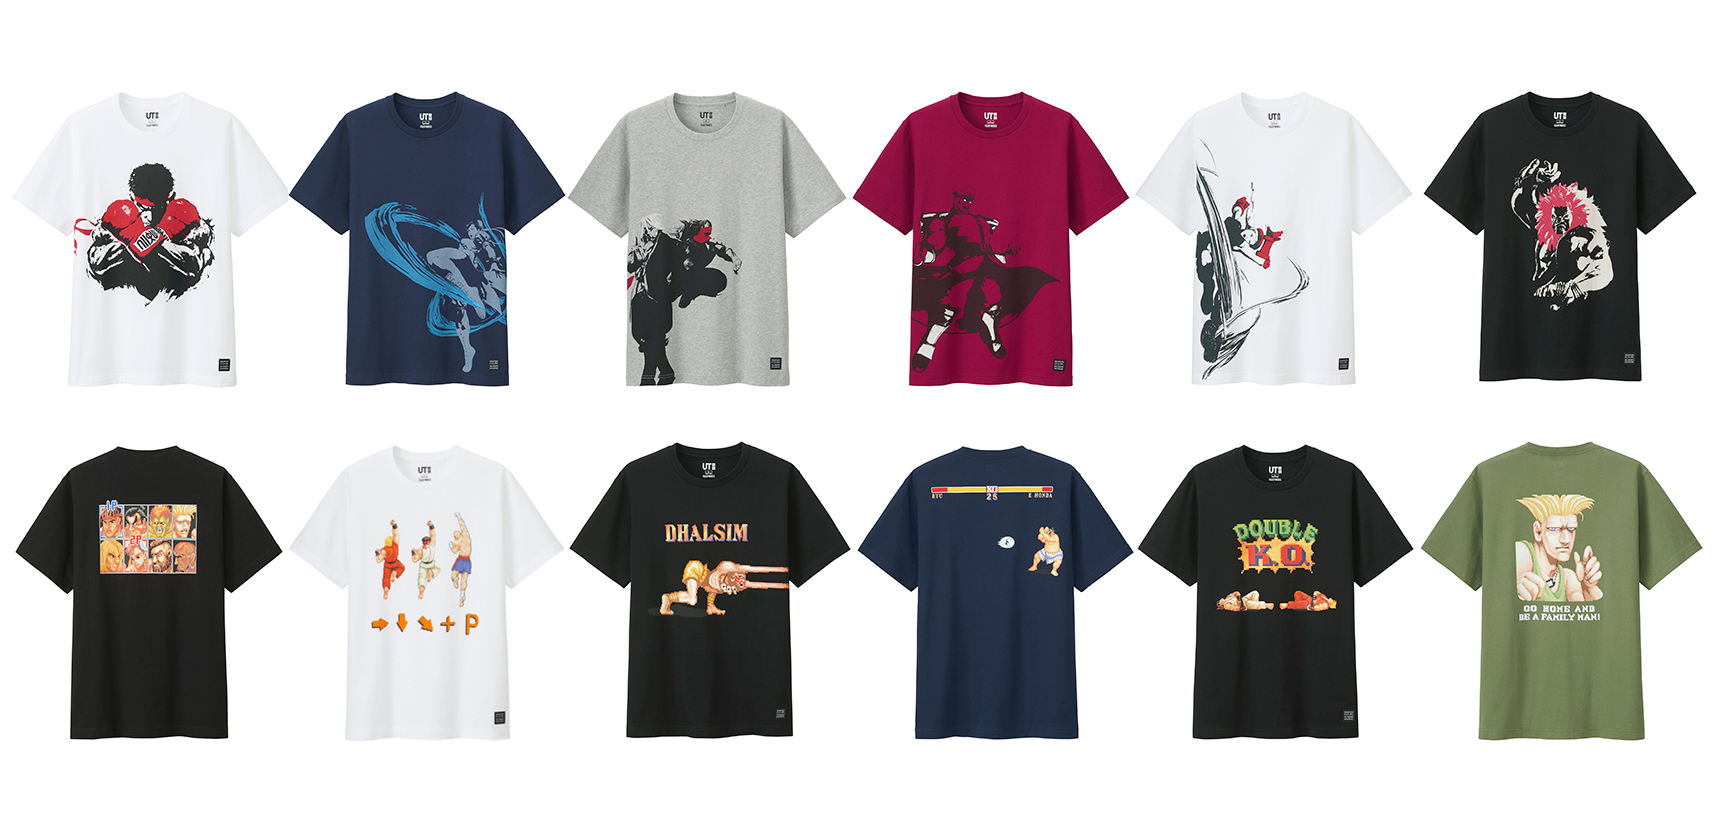 Here comes a new T-Shirt! Uniqlo Street Fighter II and V shirts ...